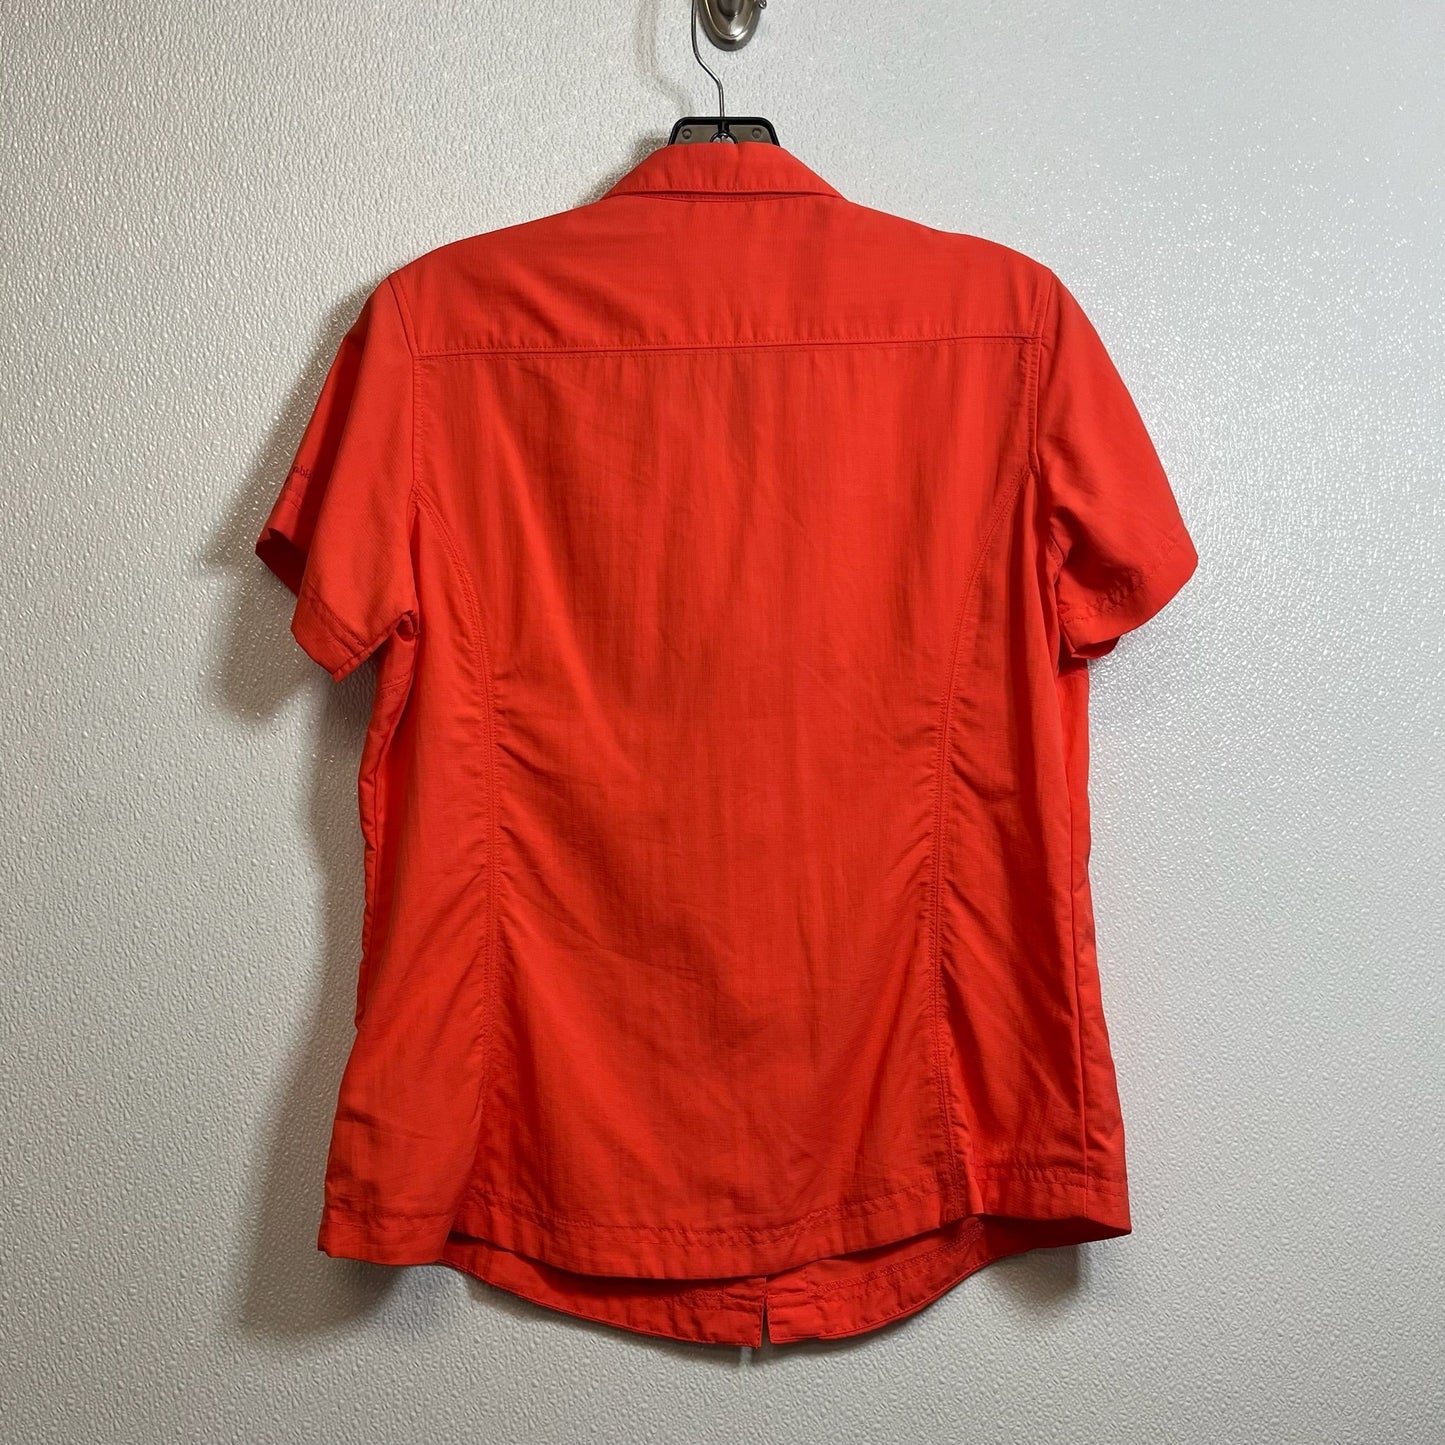 Athletic Top Short Sleeve By Columbia  Size: M